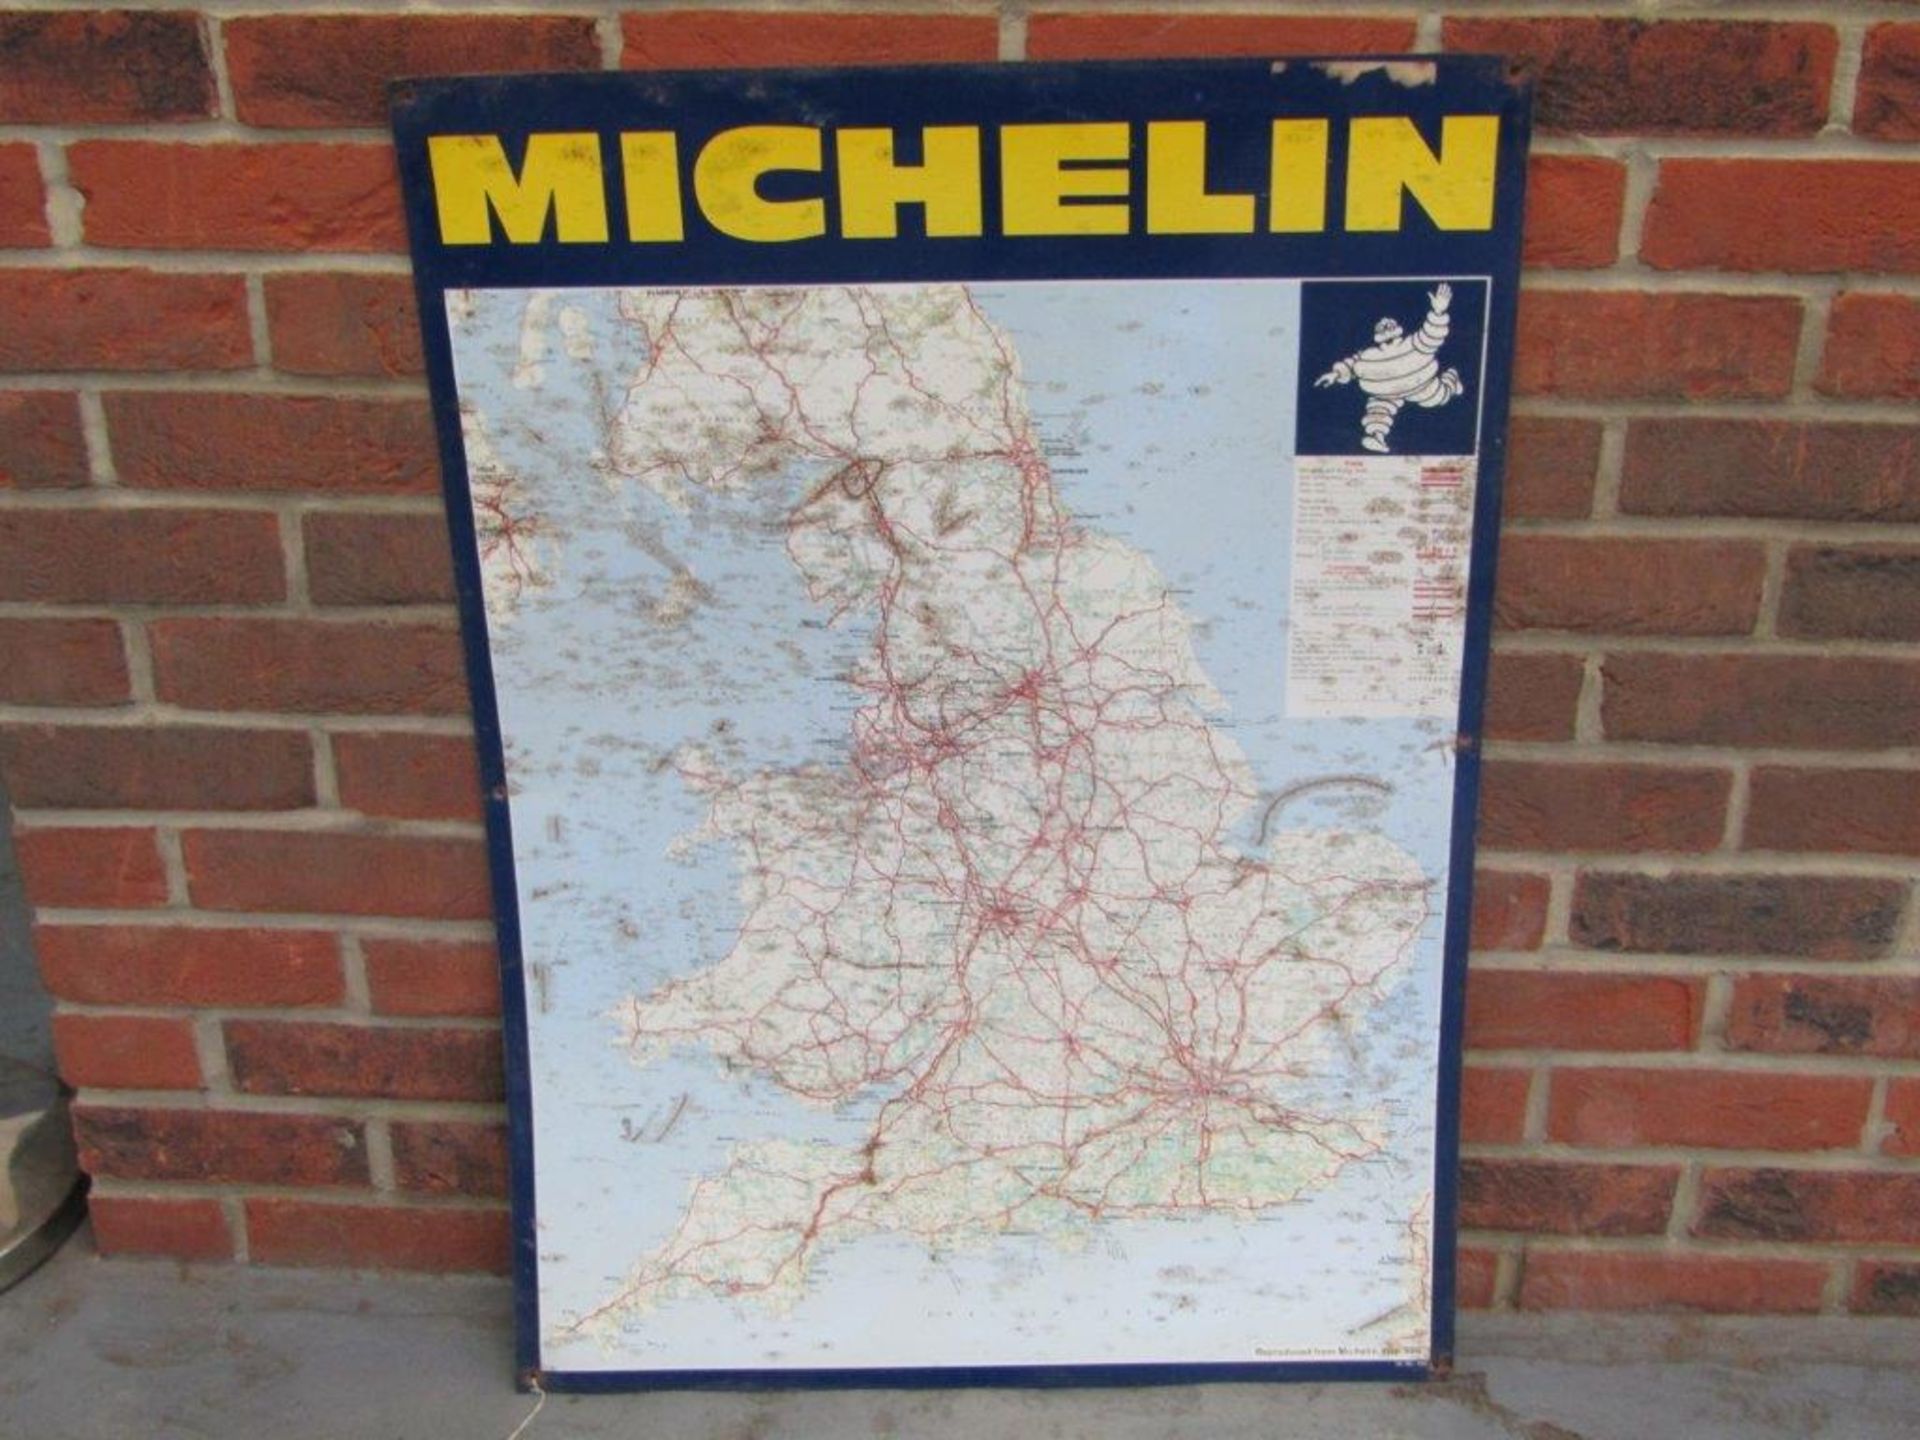 Michelin Tyres Tin Map Sign